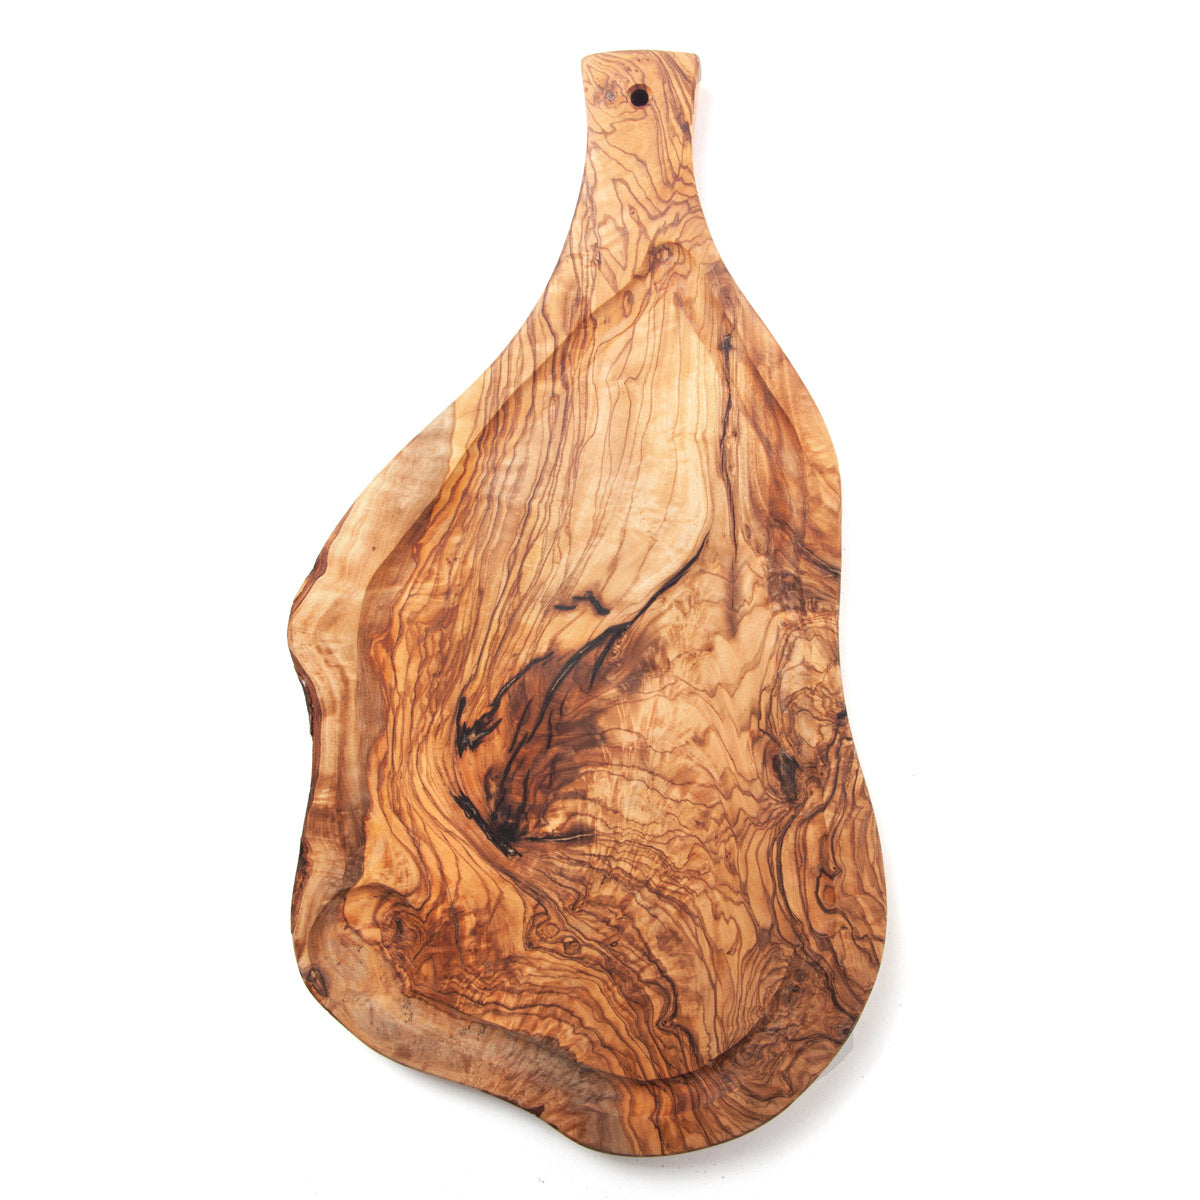 Anchor Lodge Organically Shaped Medium Olive Wood Board with Hanging Handle